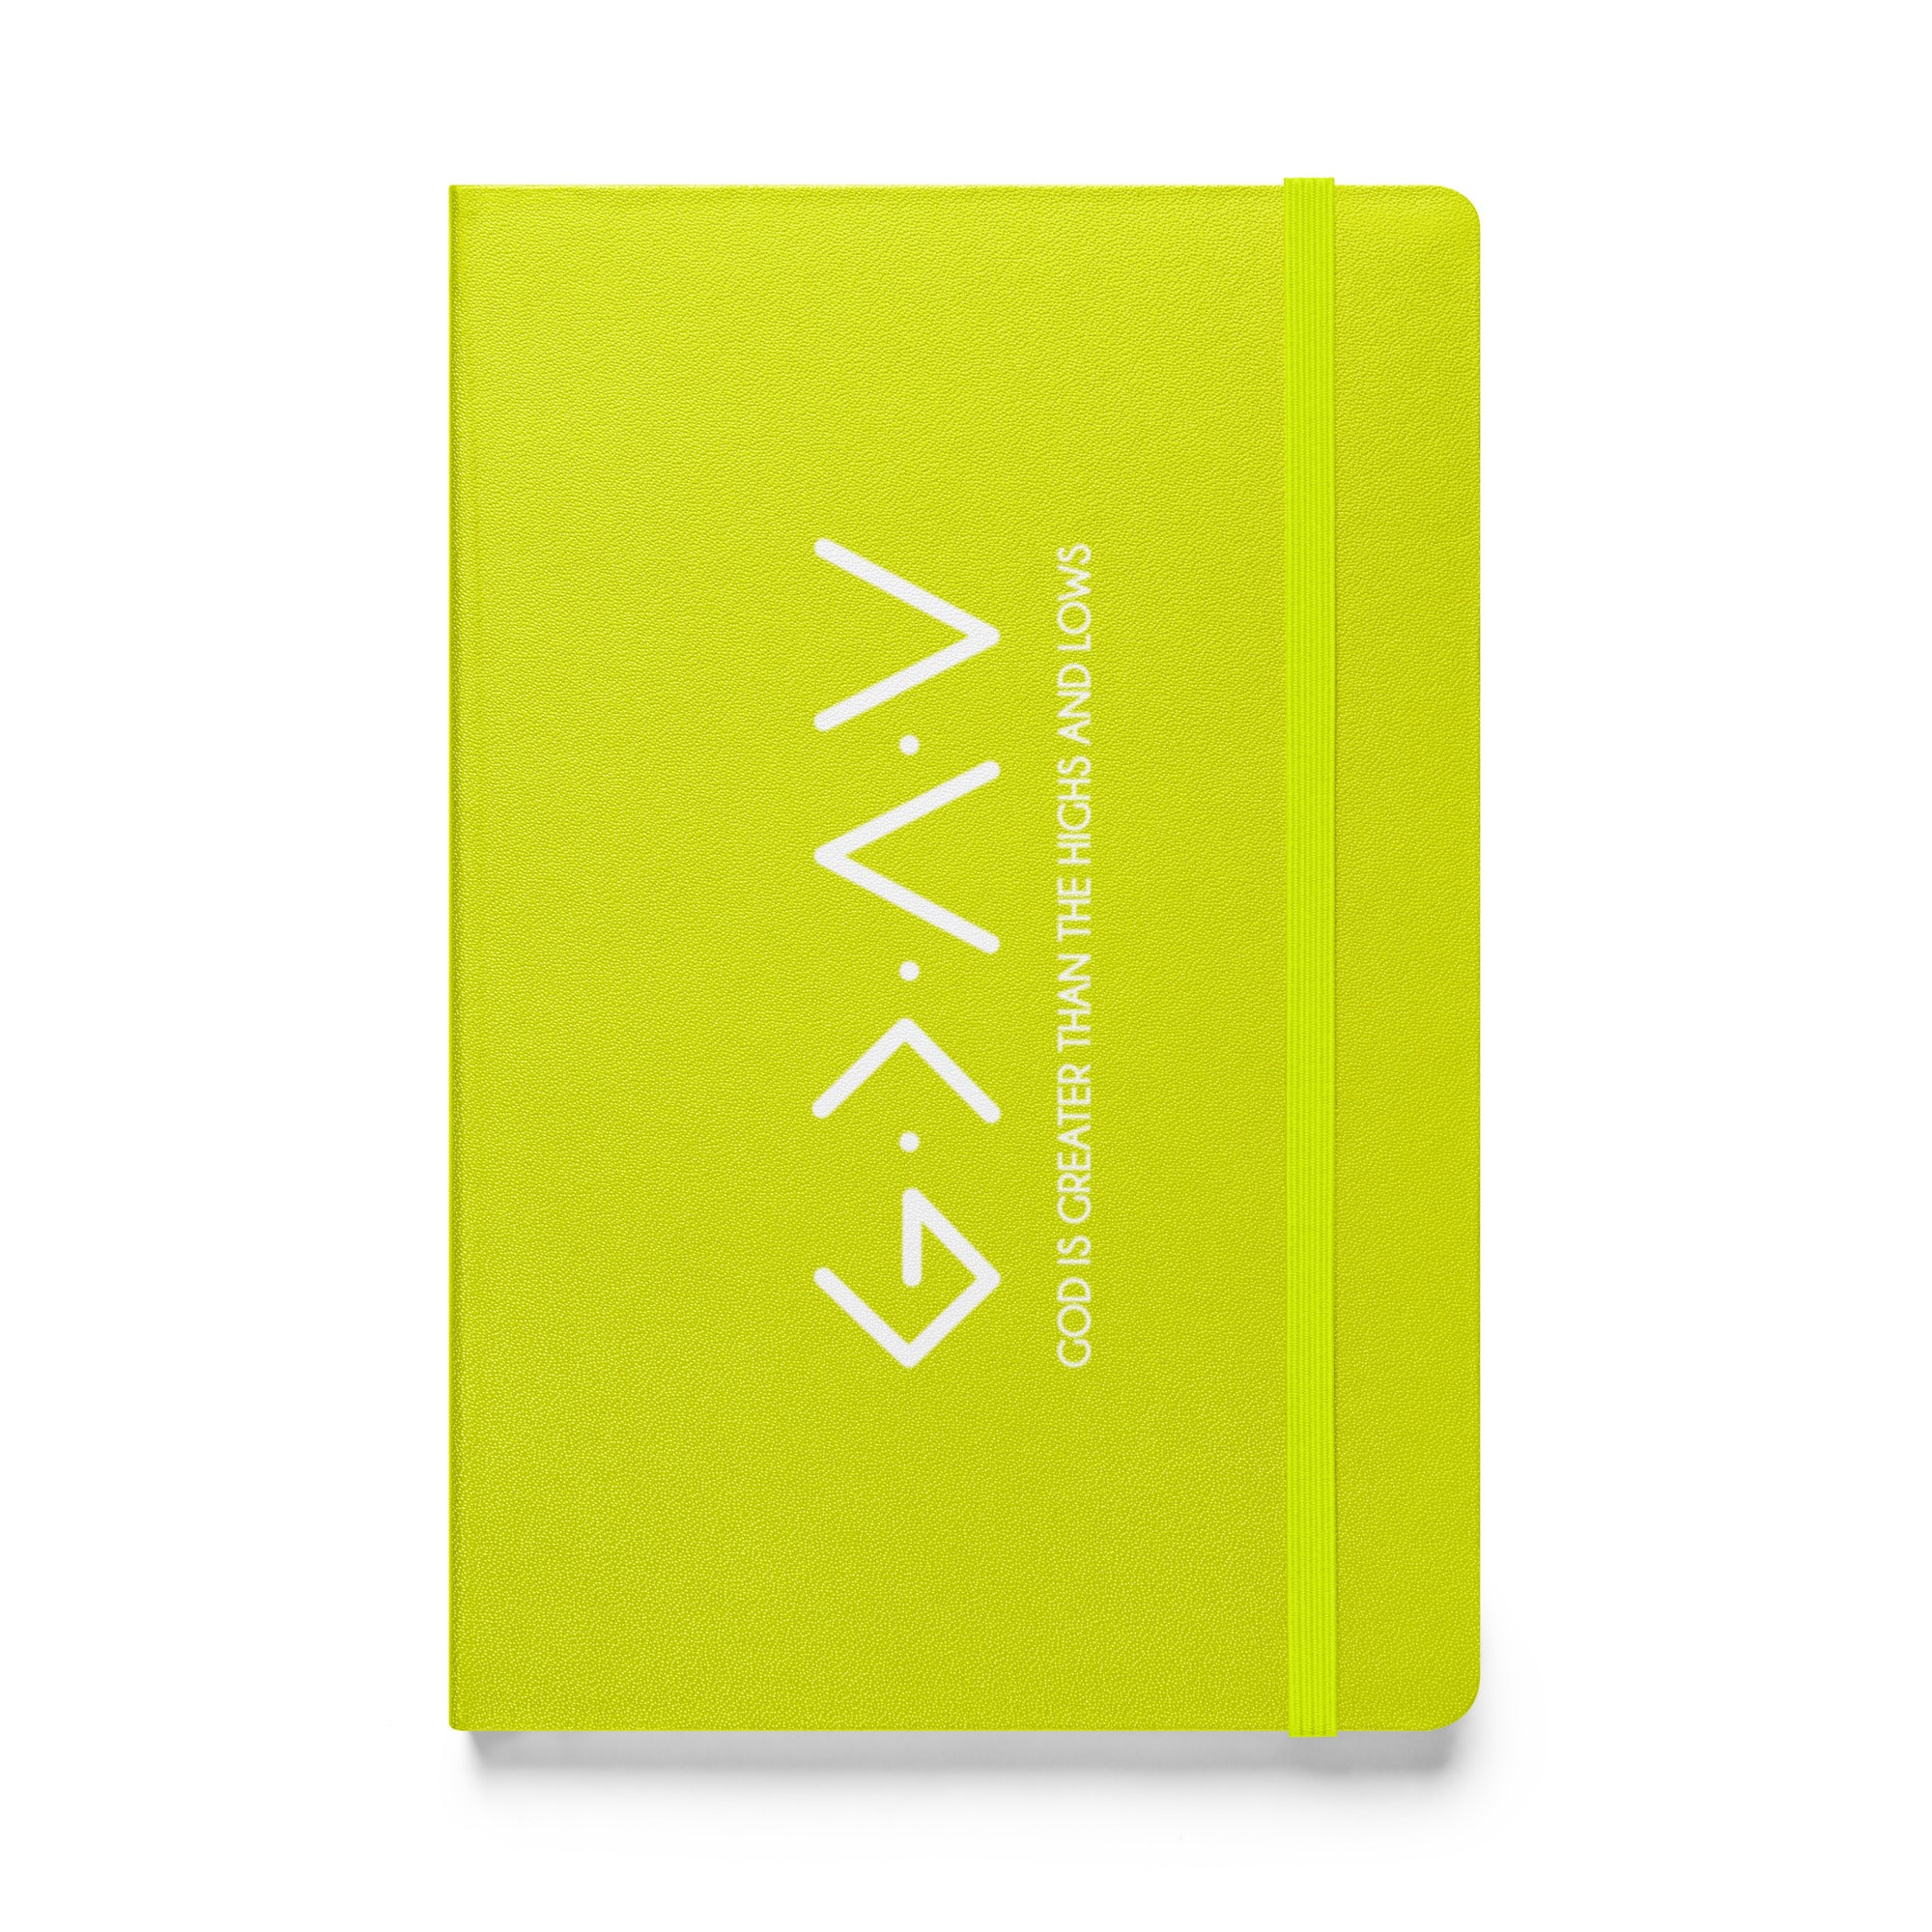 God is greater | Hardcover Journal Notebook